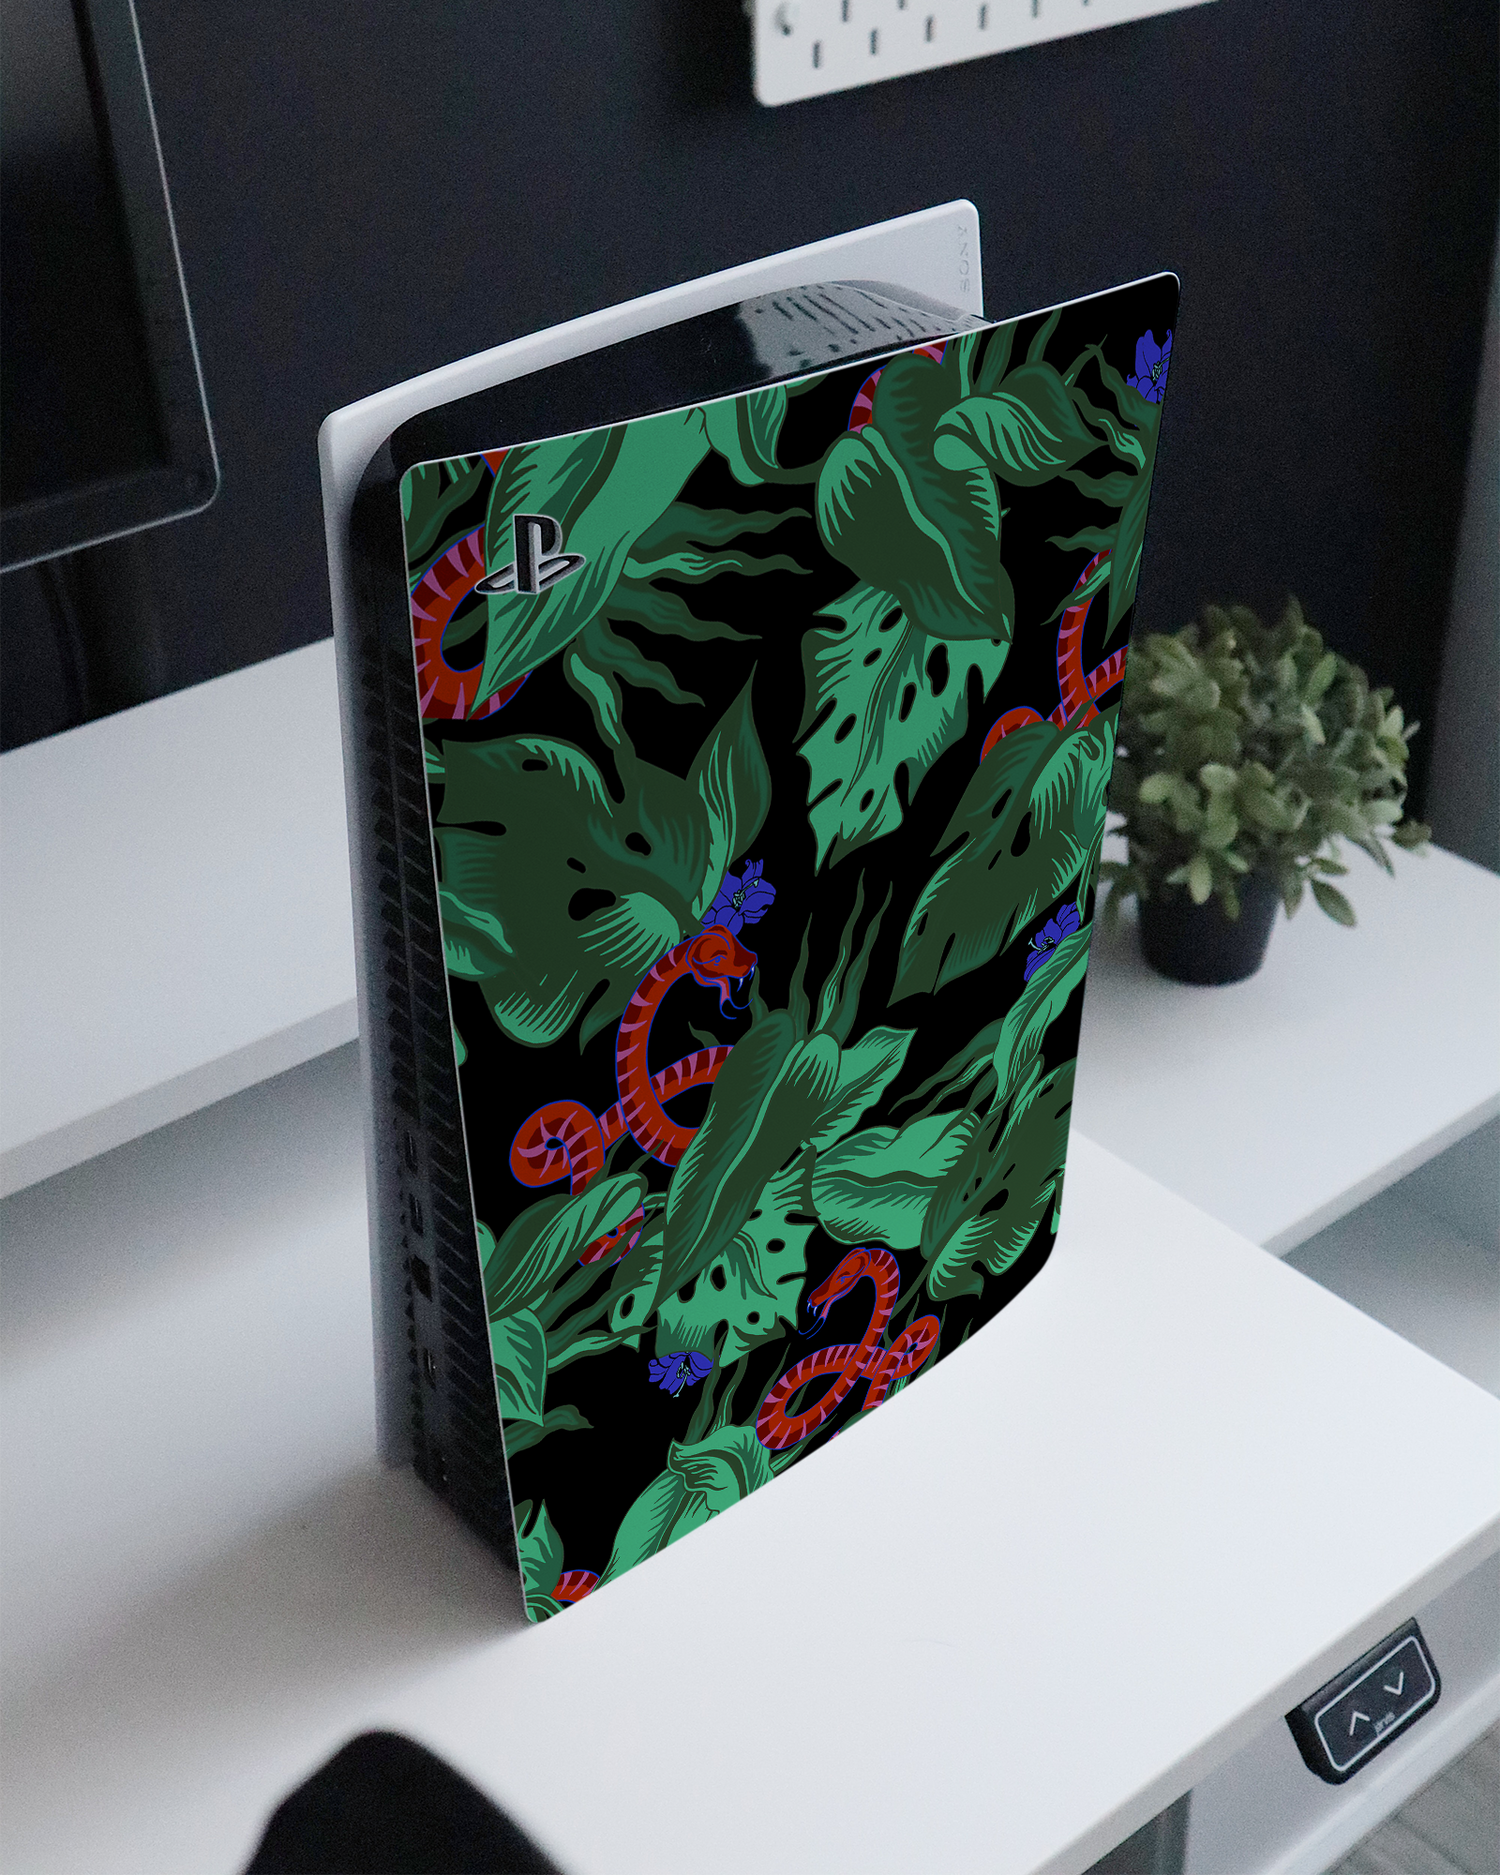 Tropical Snakes Console Skin for Sony PlayStation 5 standing on a sideboard 